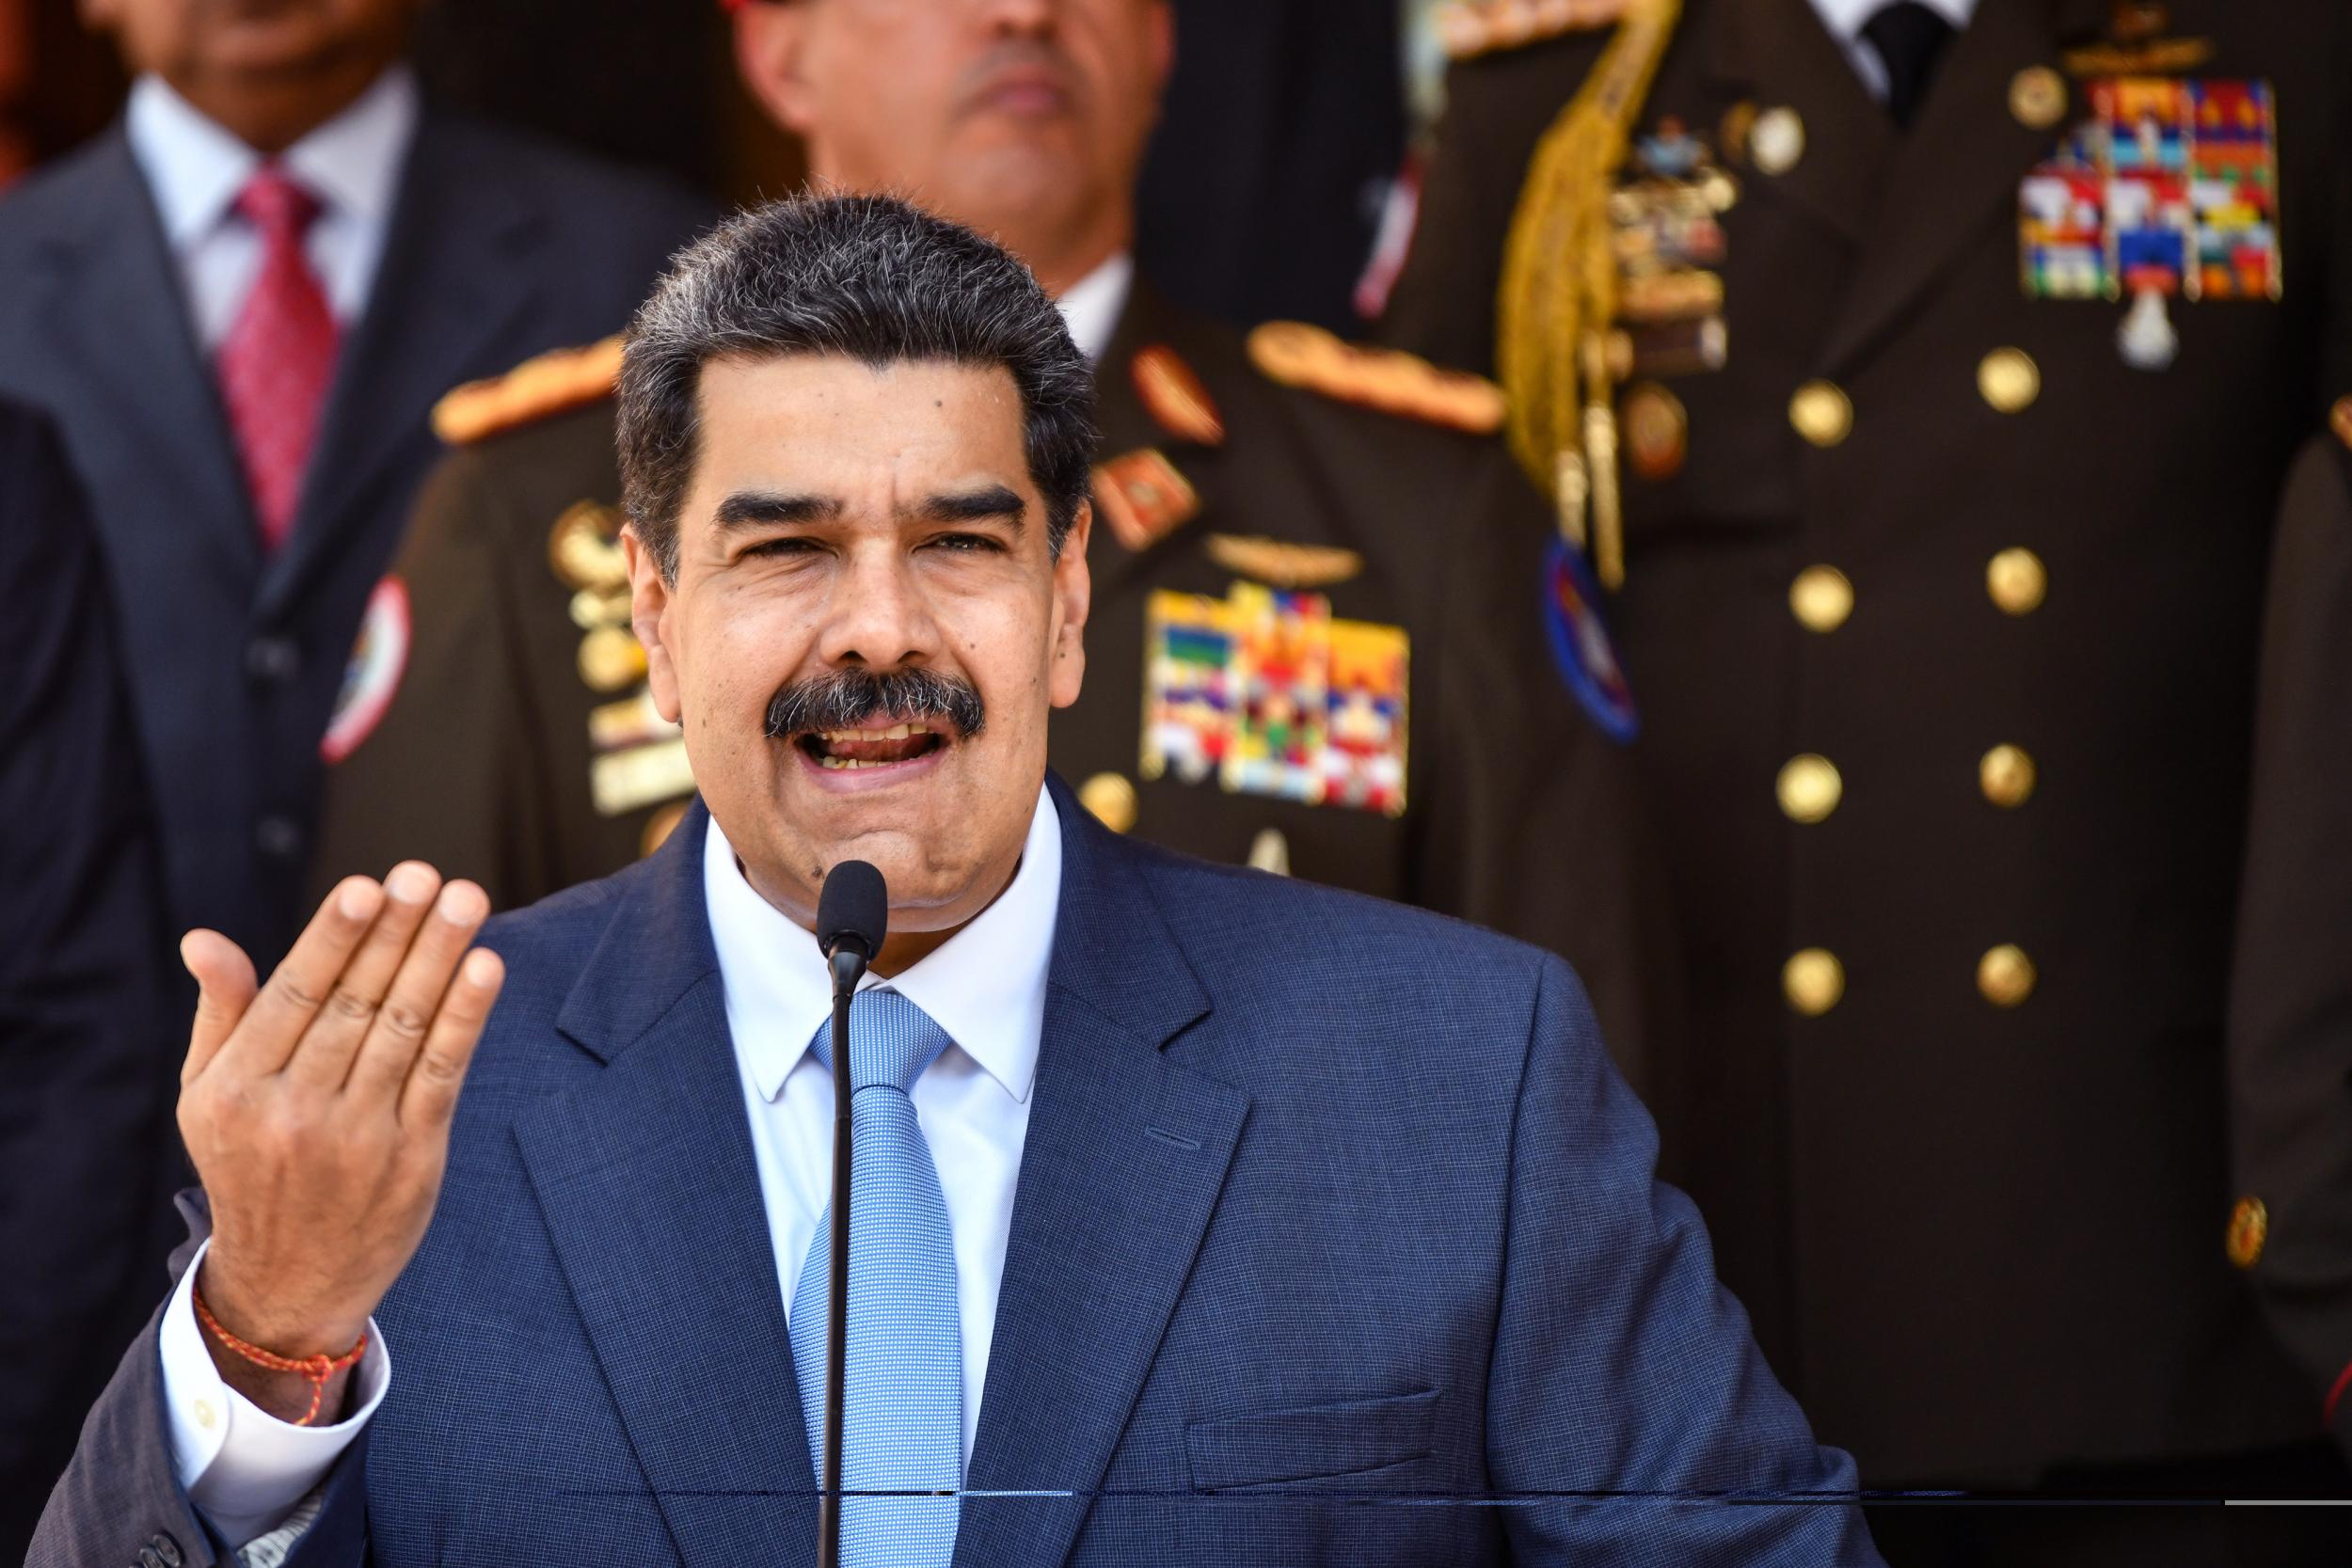 The United Nations has asked the Nicolas Maduro regime to dismantle criminal gangs running gold mines in Venezuela's Amazon region